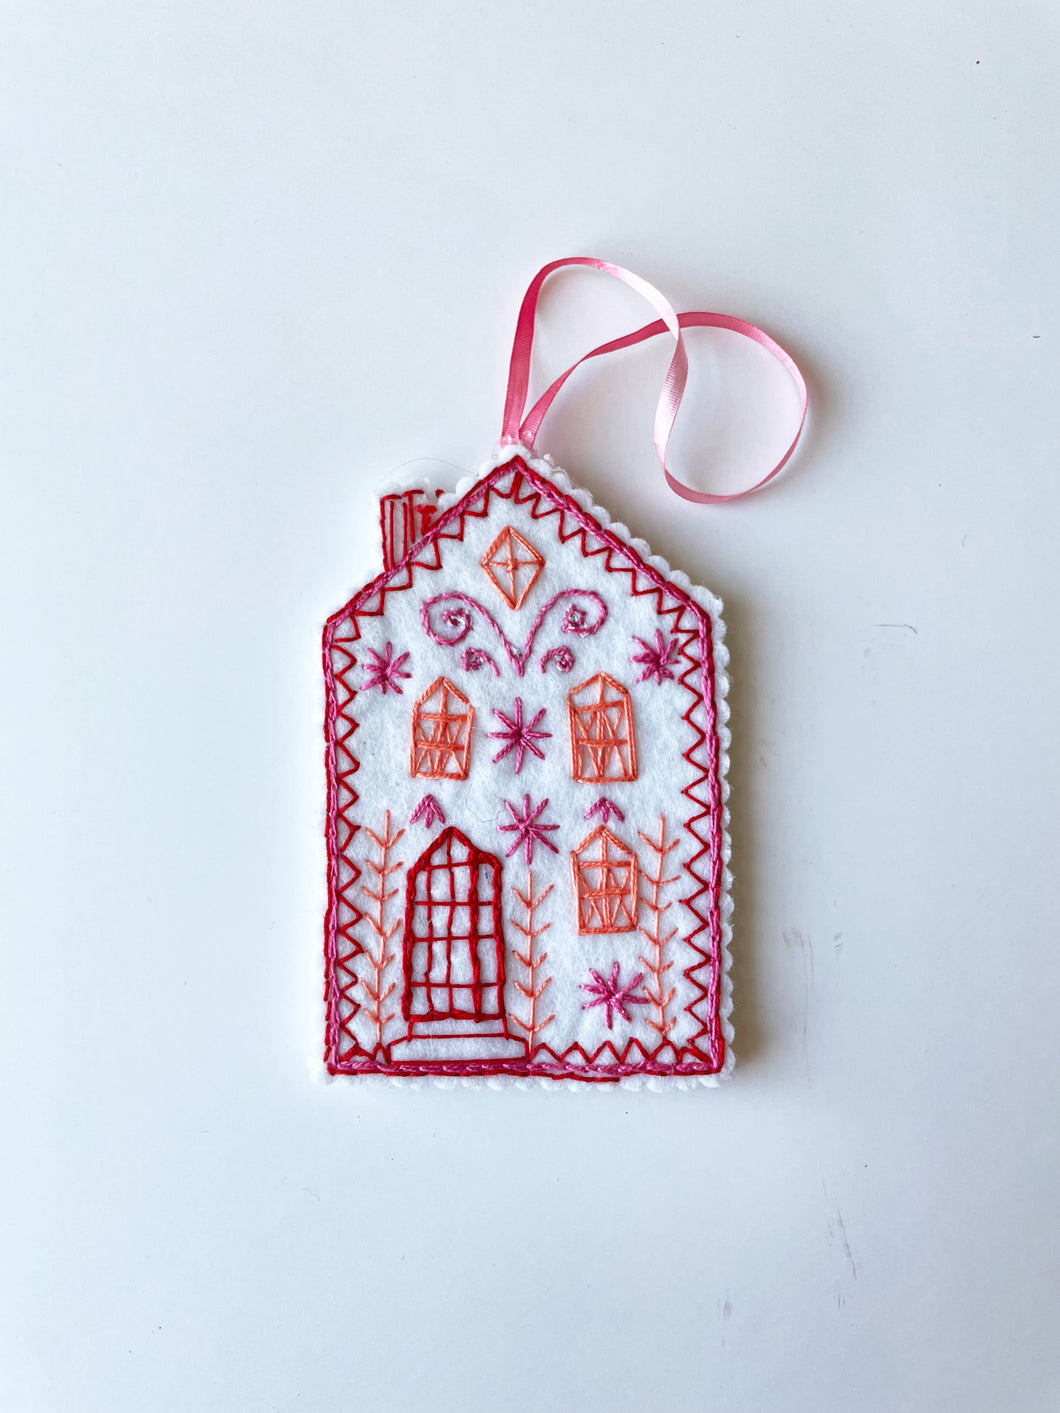 Handmade Wool Felt House Ornament with Embroidery